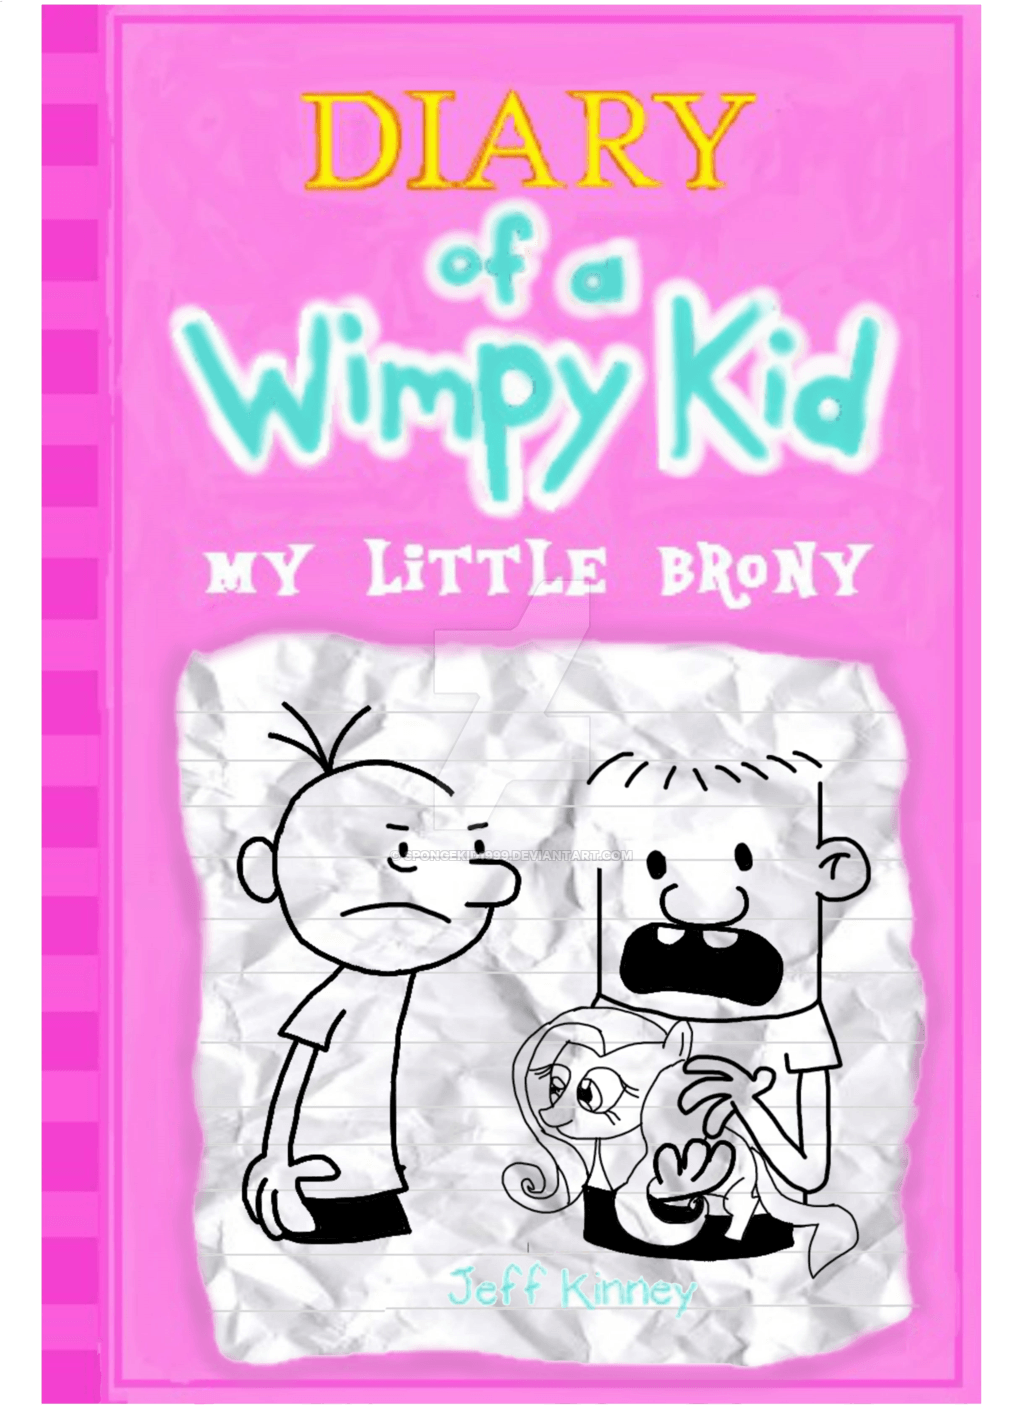 Diary of a Wimpy Kid favourites